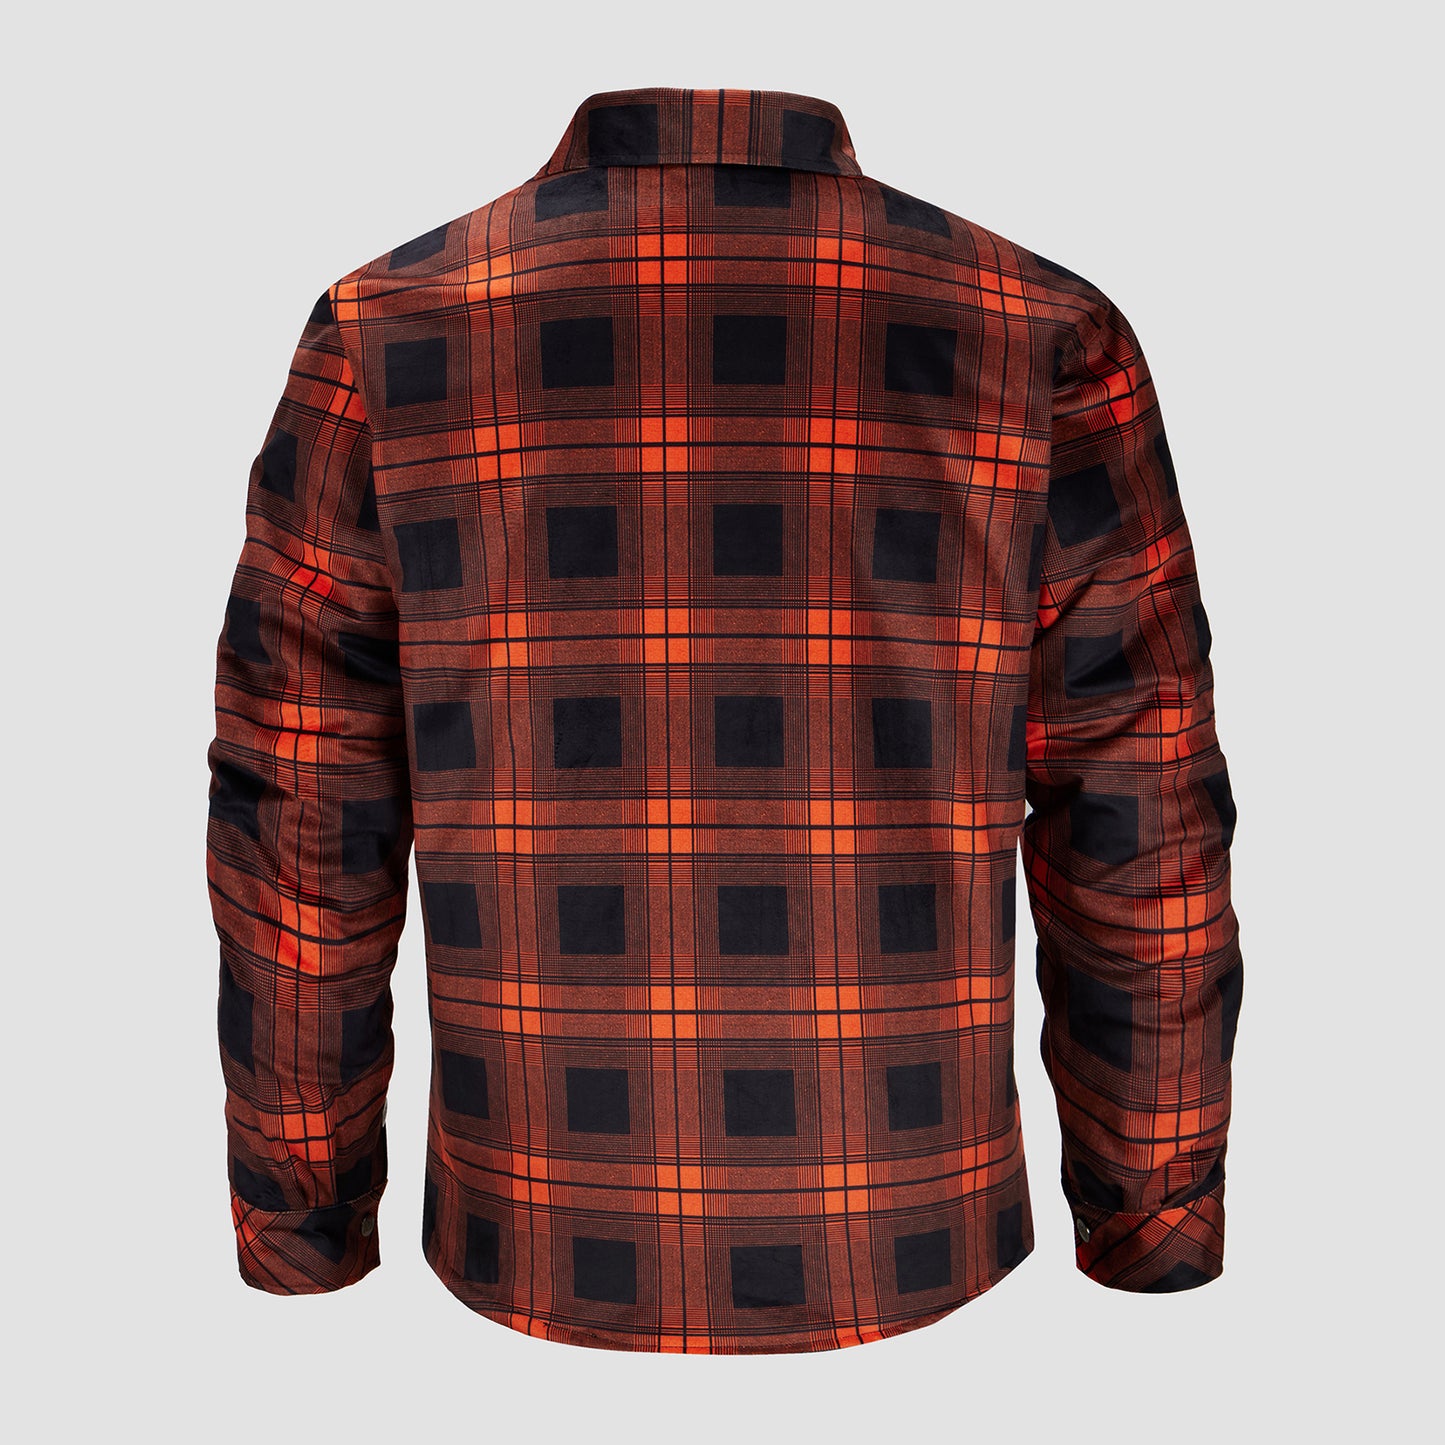 Long Sleeve Quilted Lined Plaid Flannel Shirt Jacket - Orange